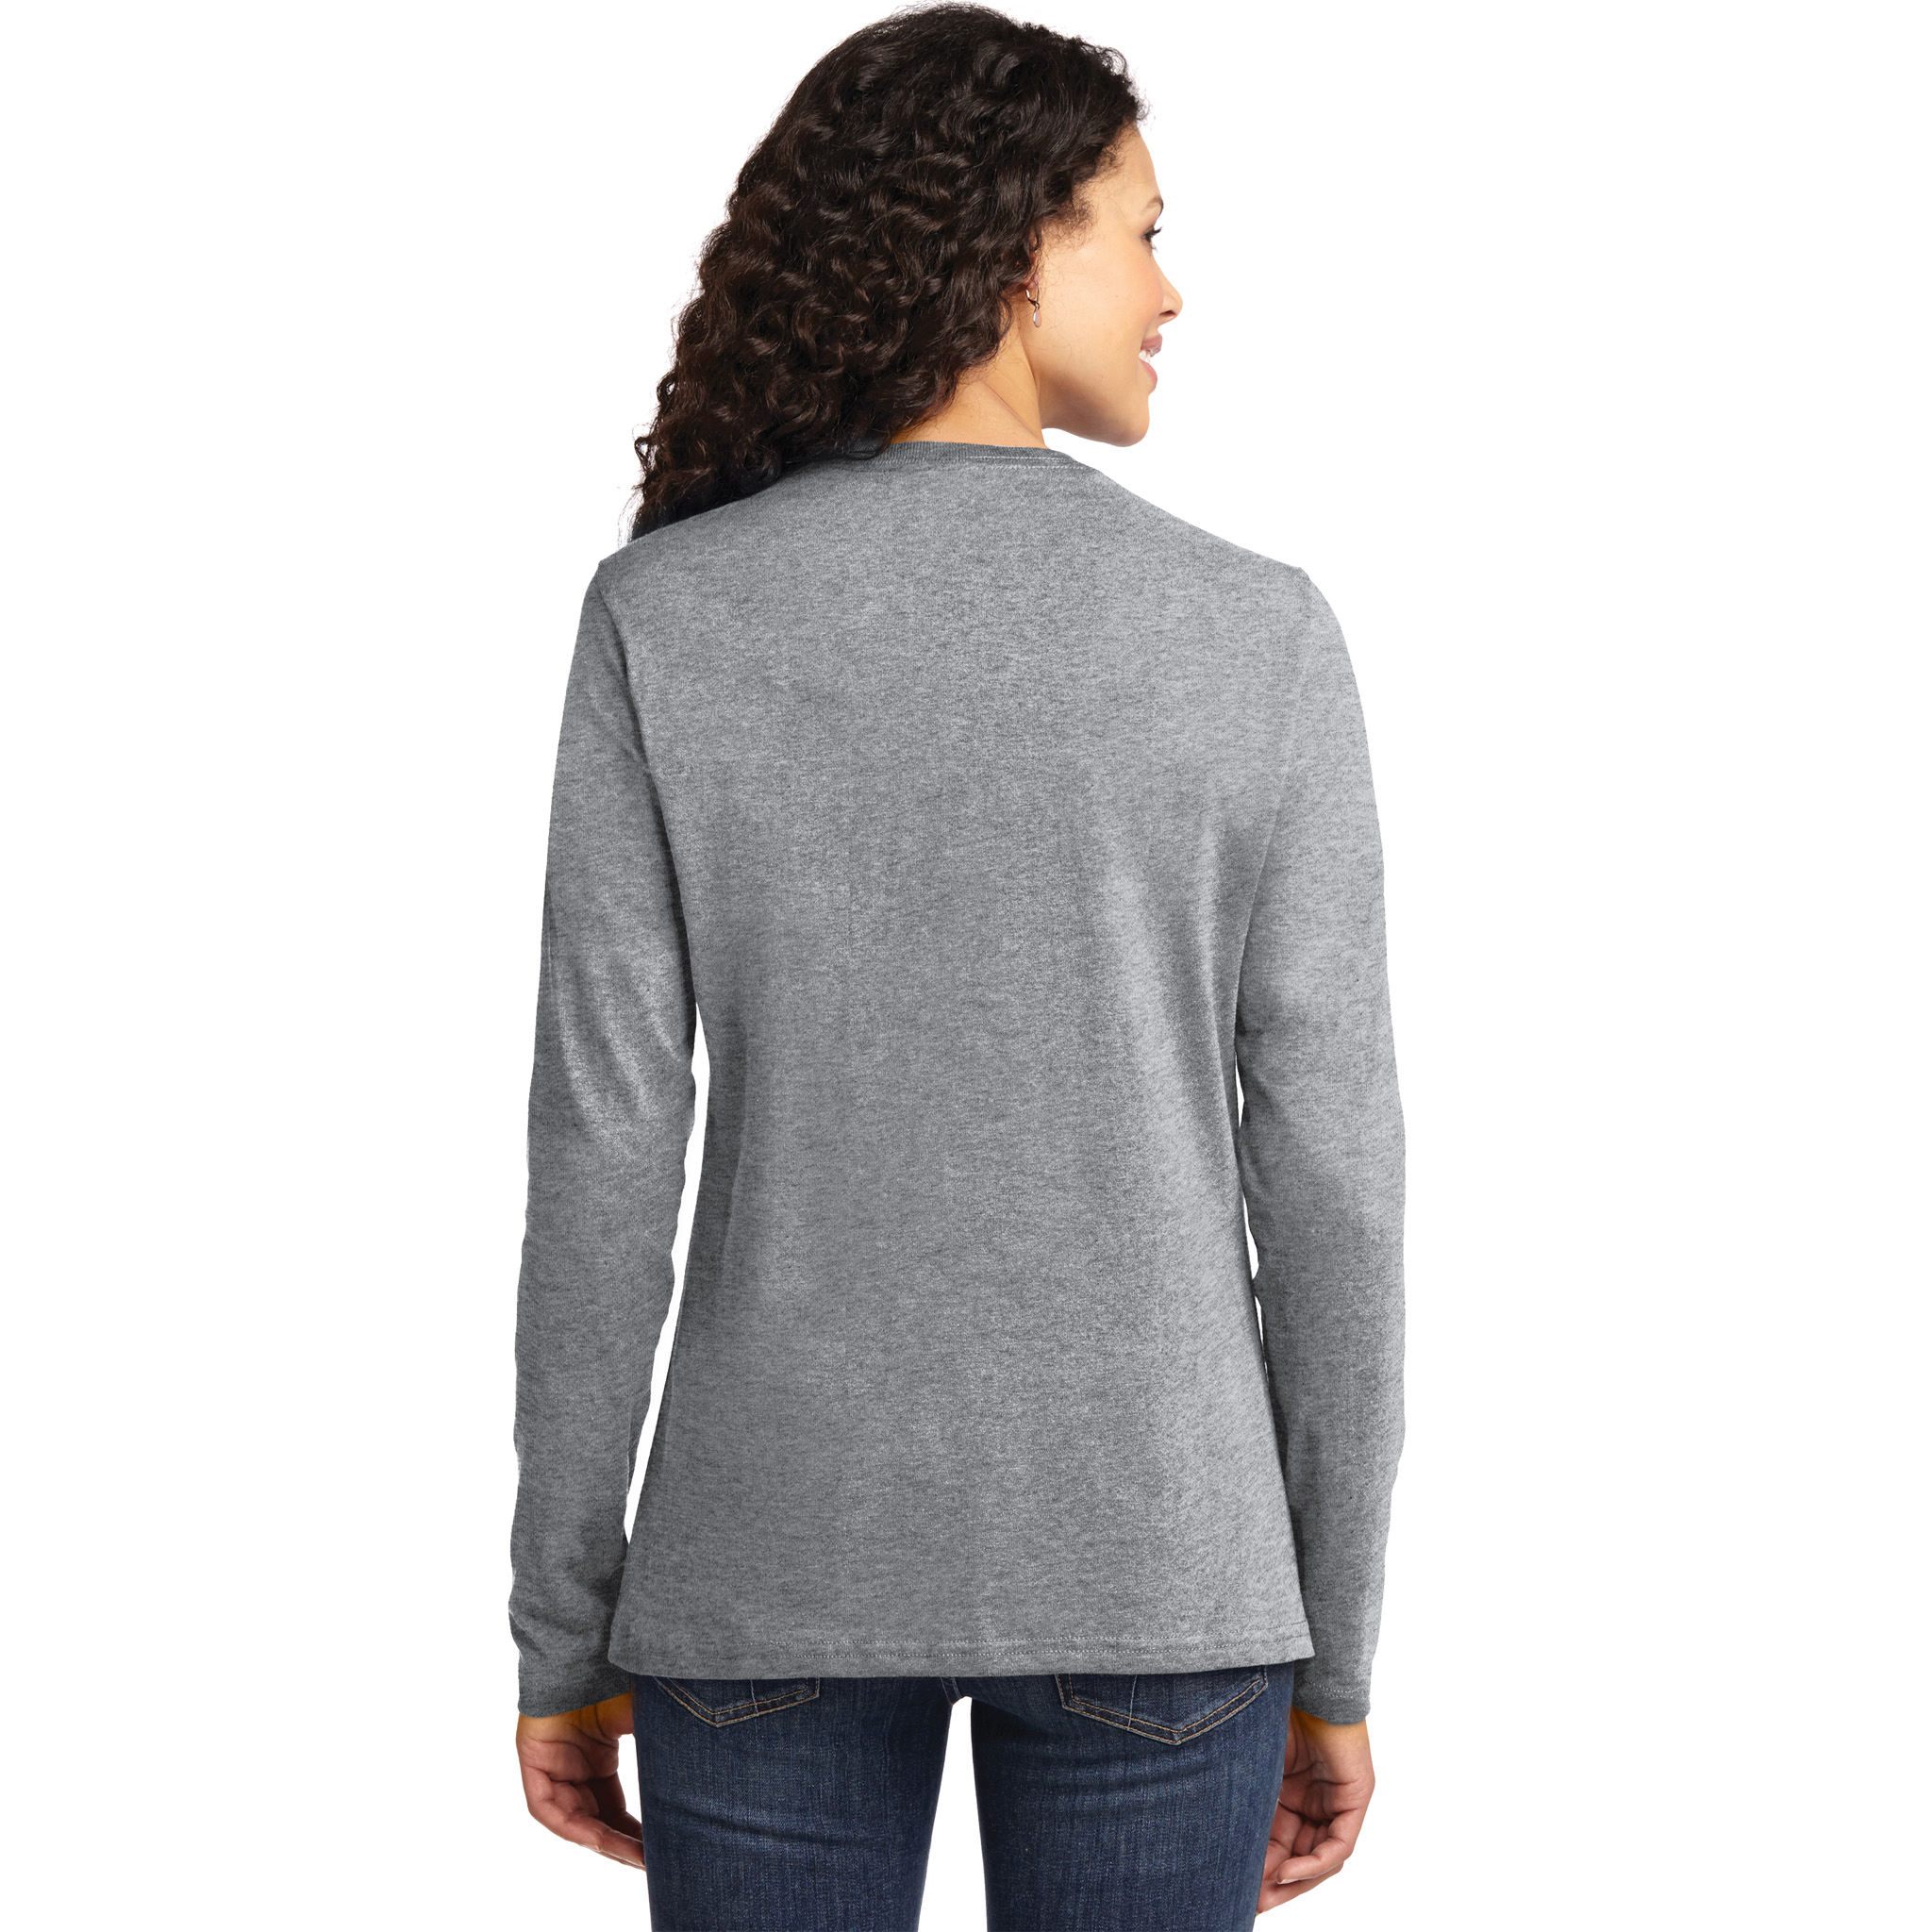 High Performance Shelby GT500 Ladies Missy Fit Long Sleeve Shirt